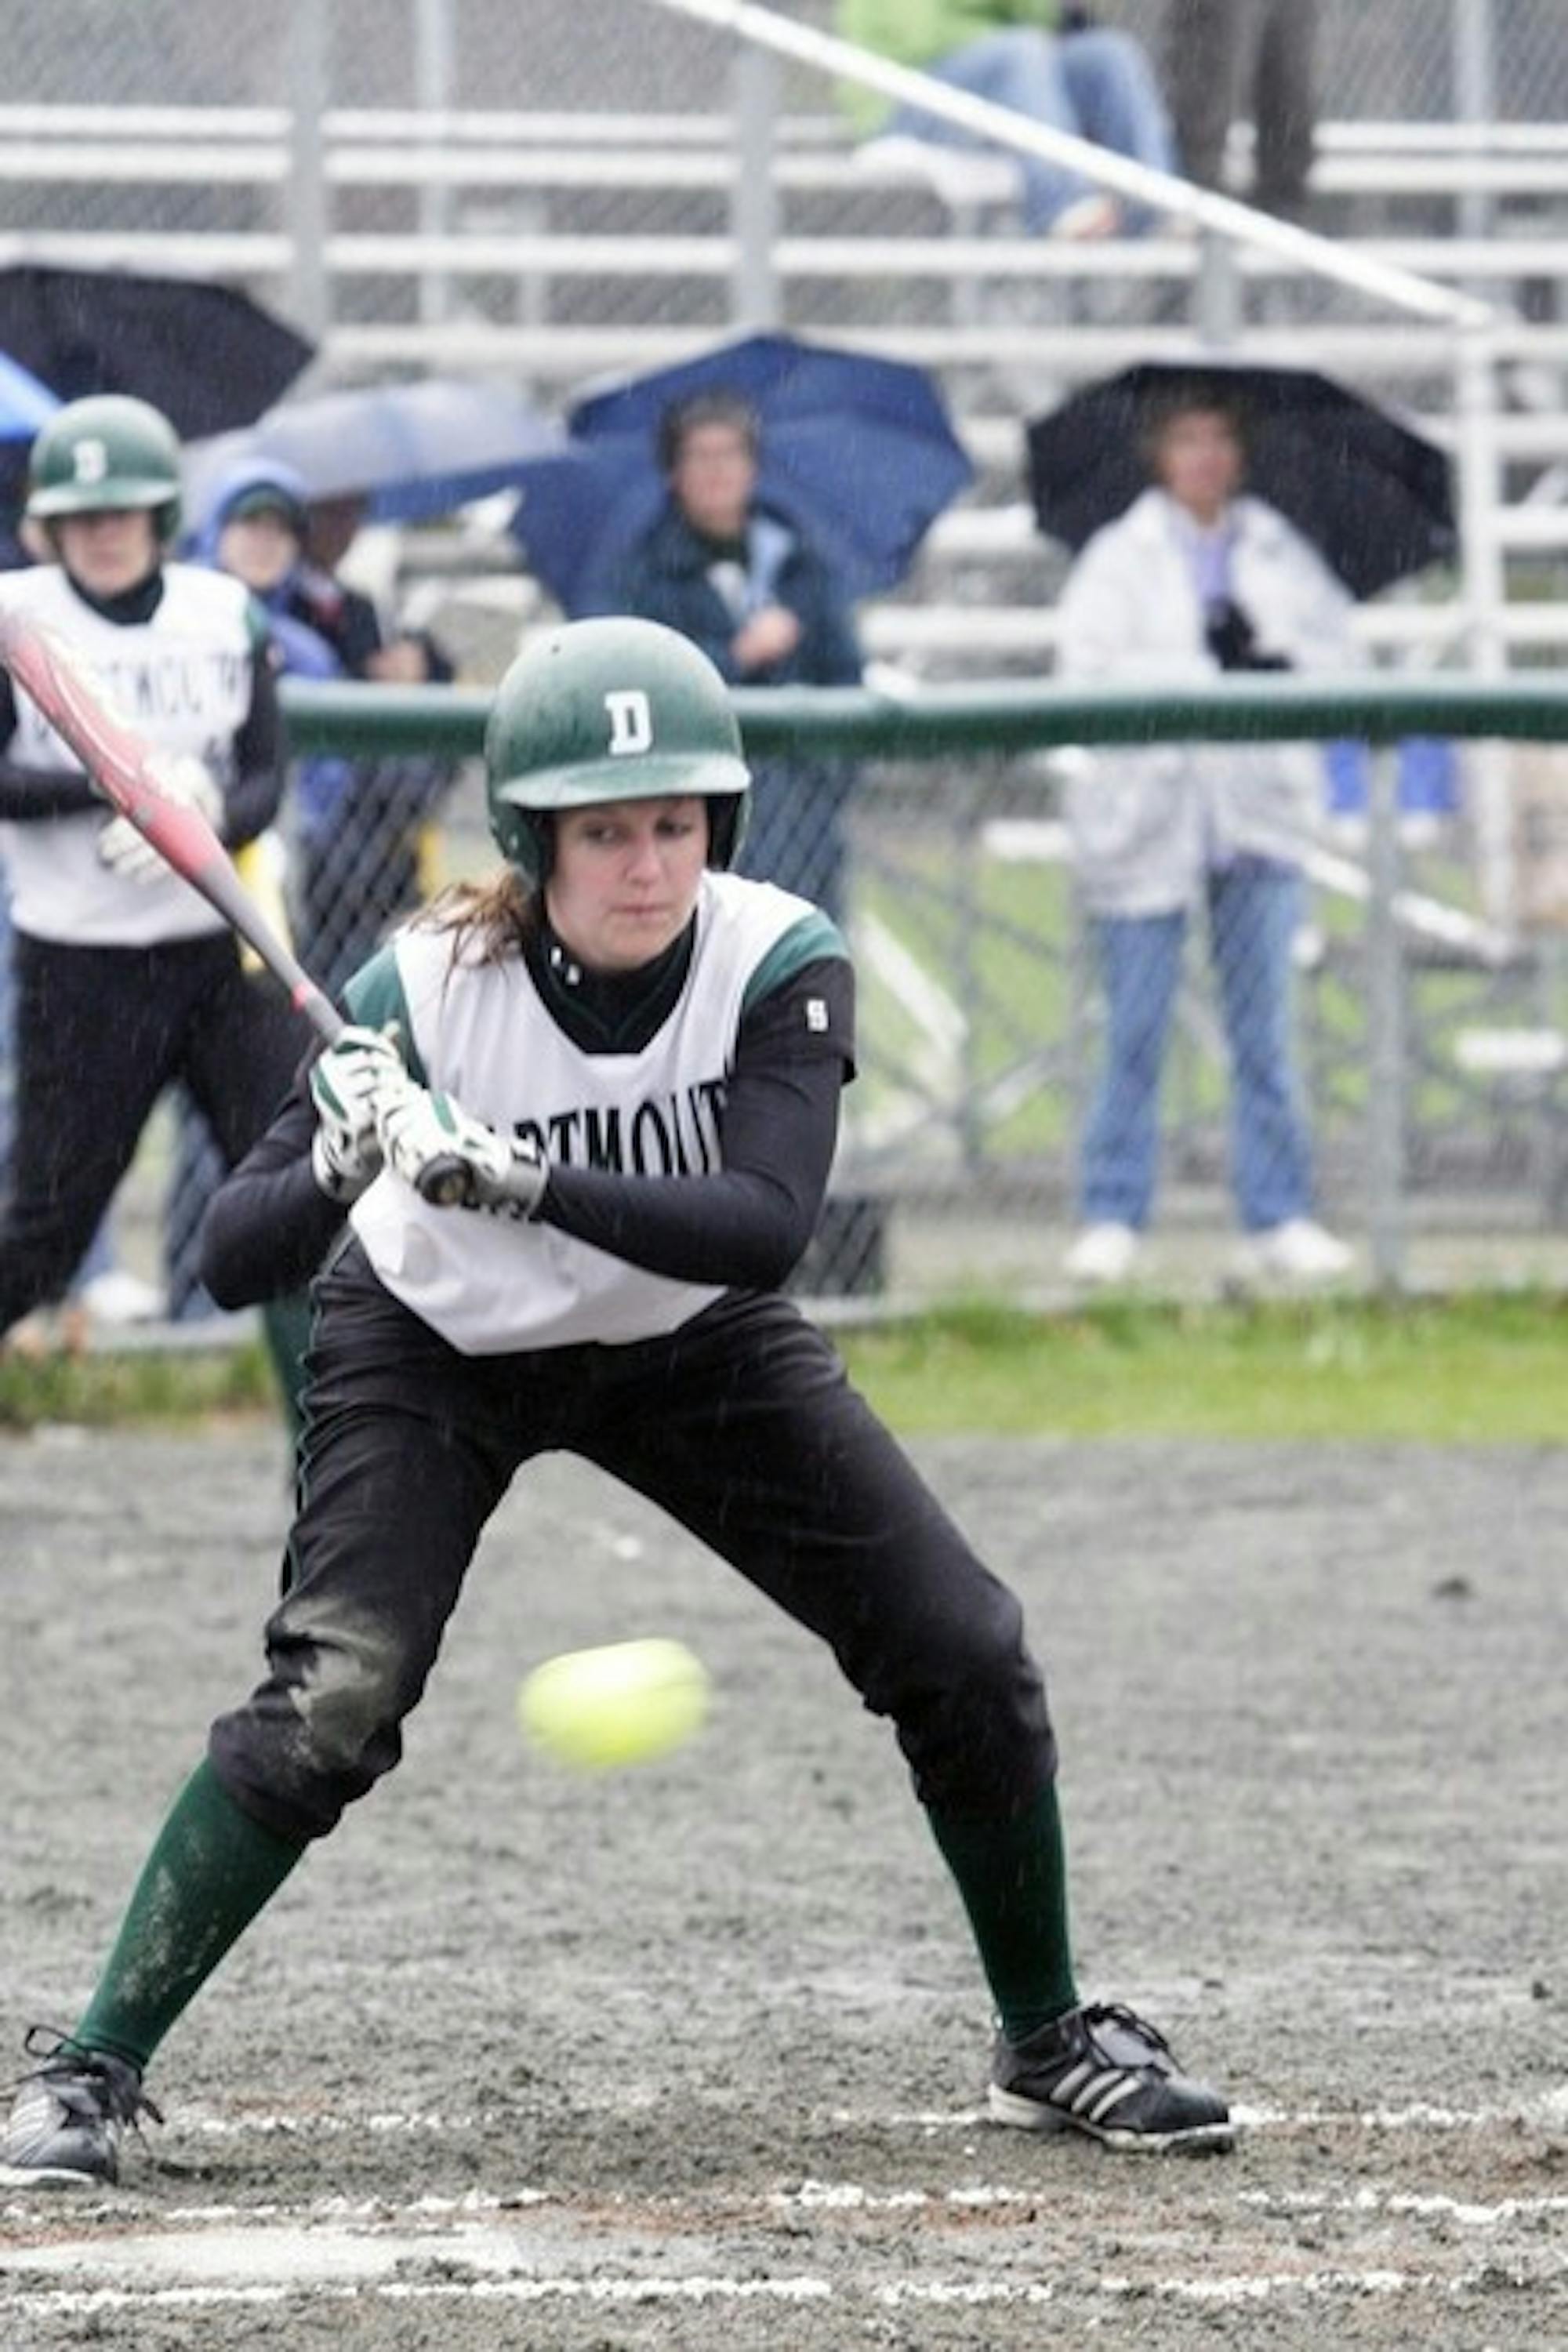 UMass pitchers rendered Dartmouth's bats silent Wednesday, as the team could not muster a single run in successive losses to the Minutewomen.